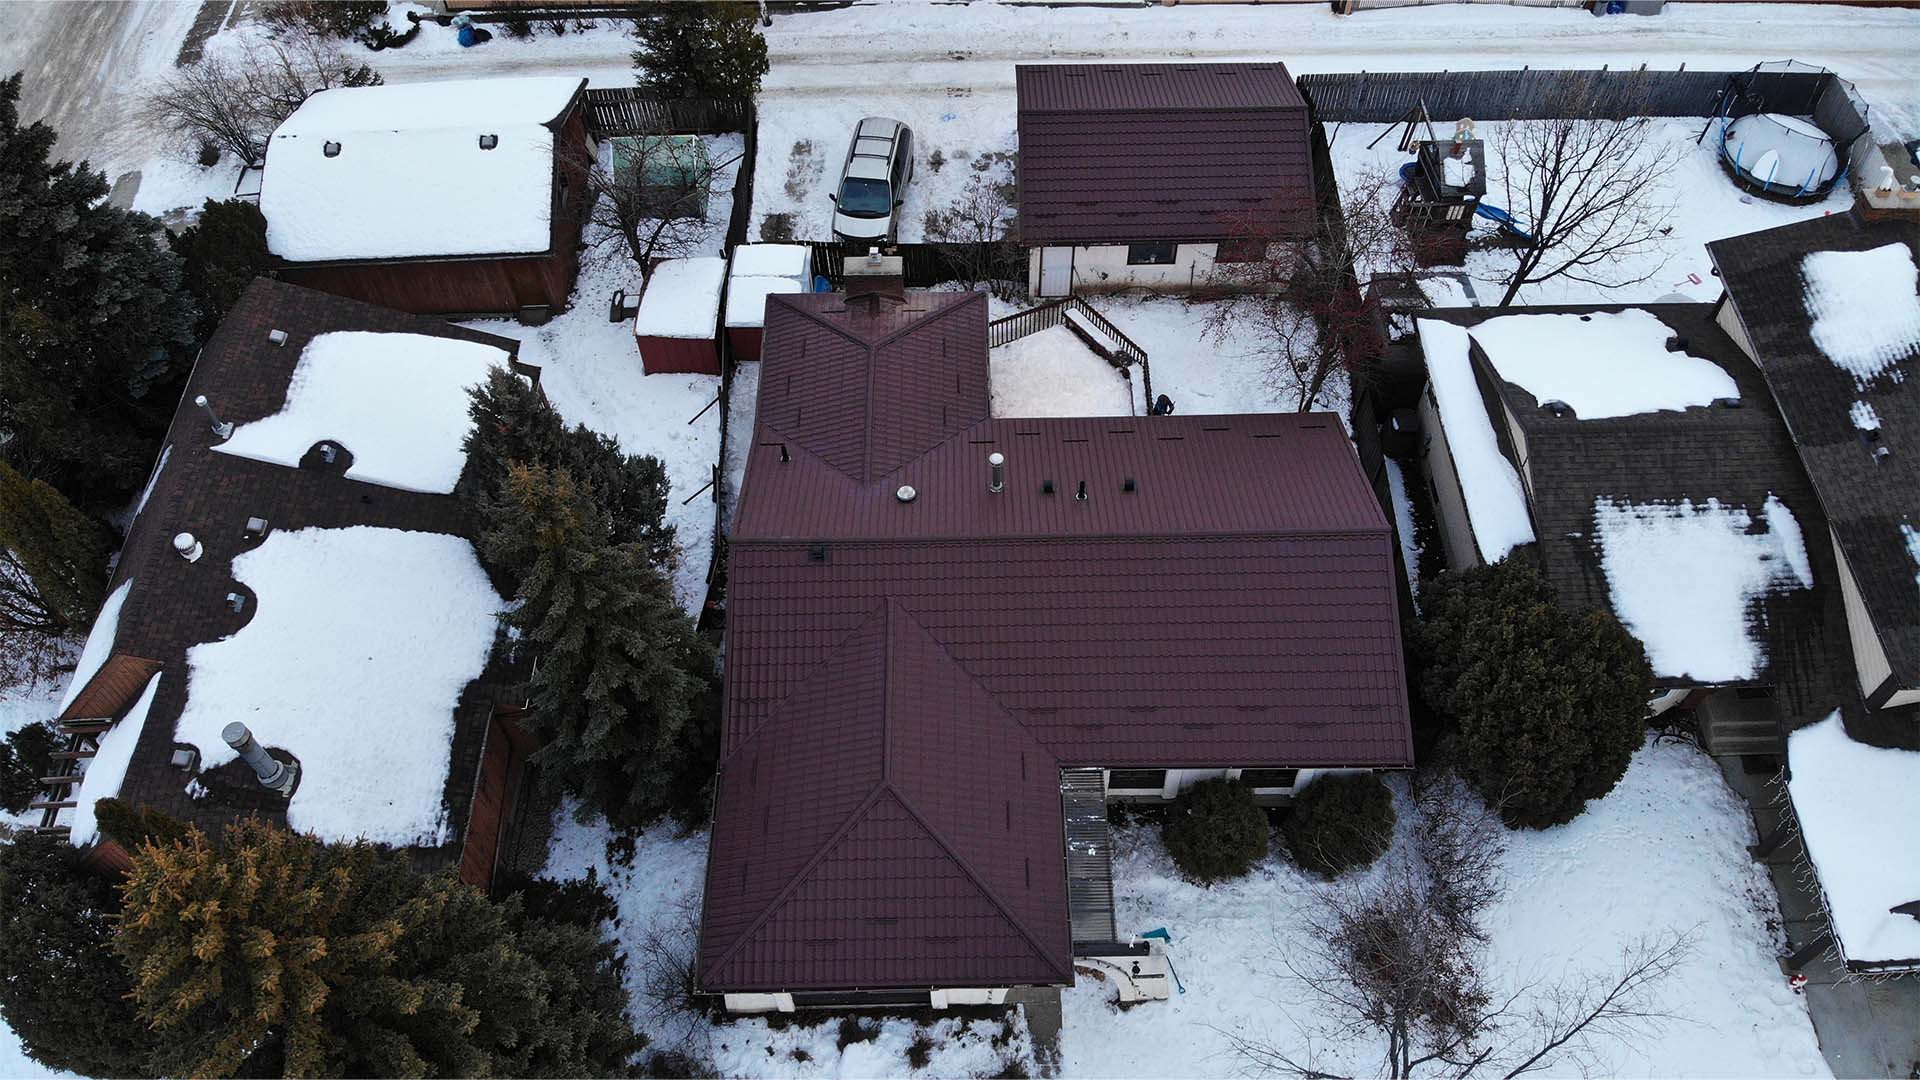 A home with metal roofing designed to last winters in Alberta